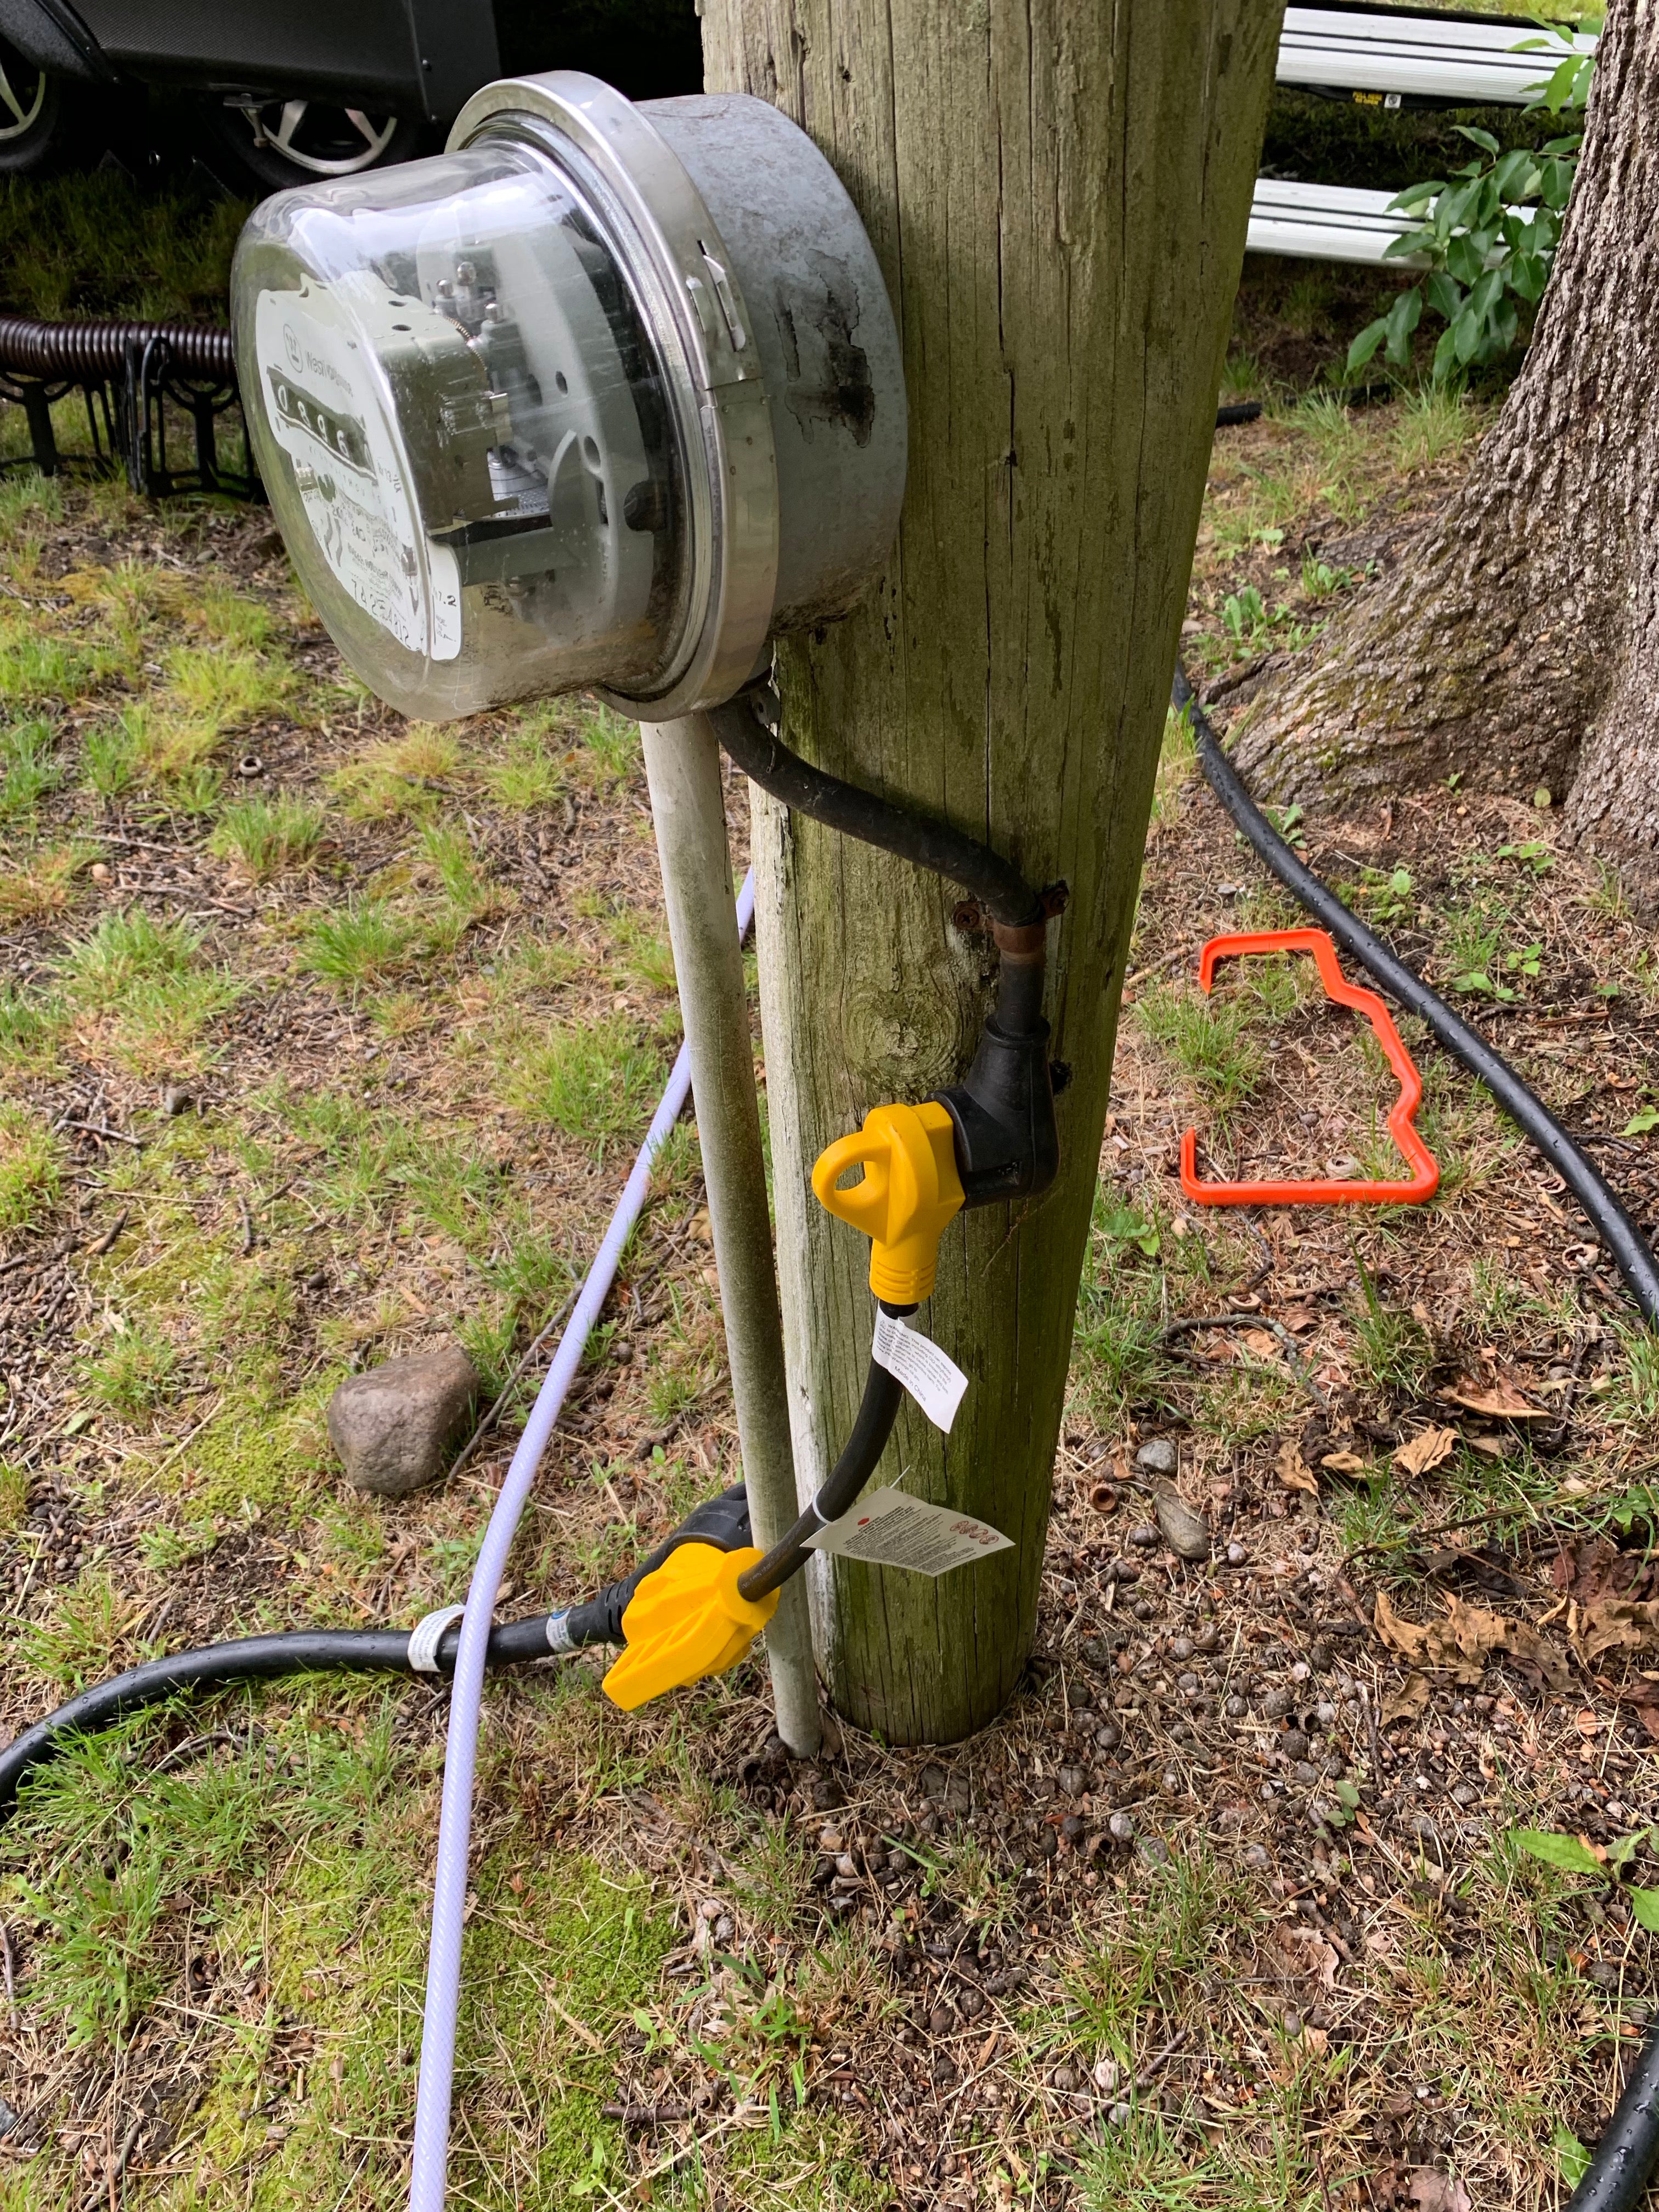 30amp service at campsite. Worked great, outlet was in rough shape from being in the elements all the time.